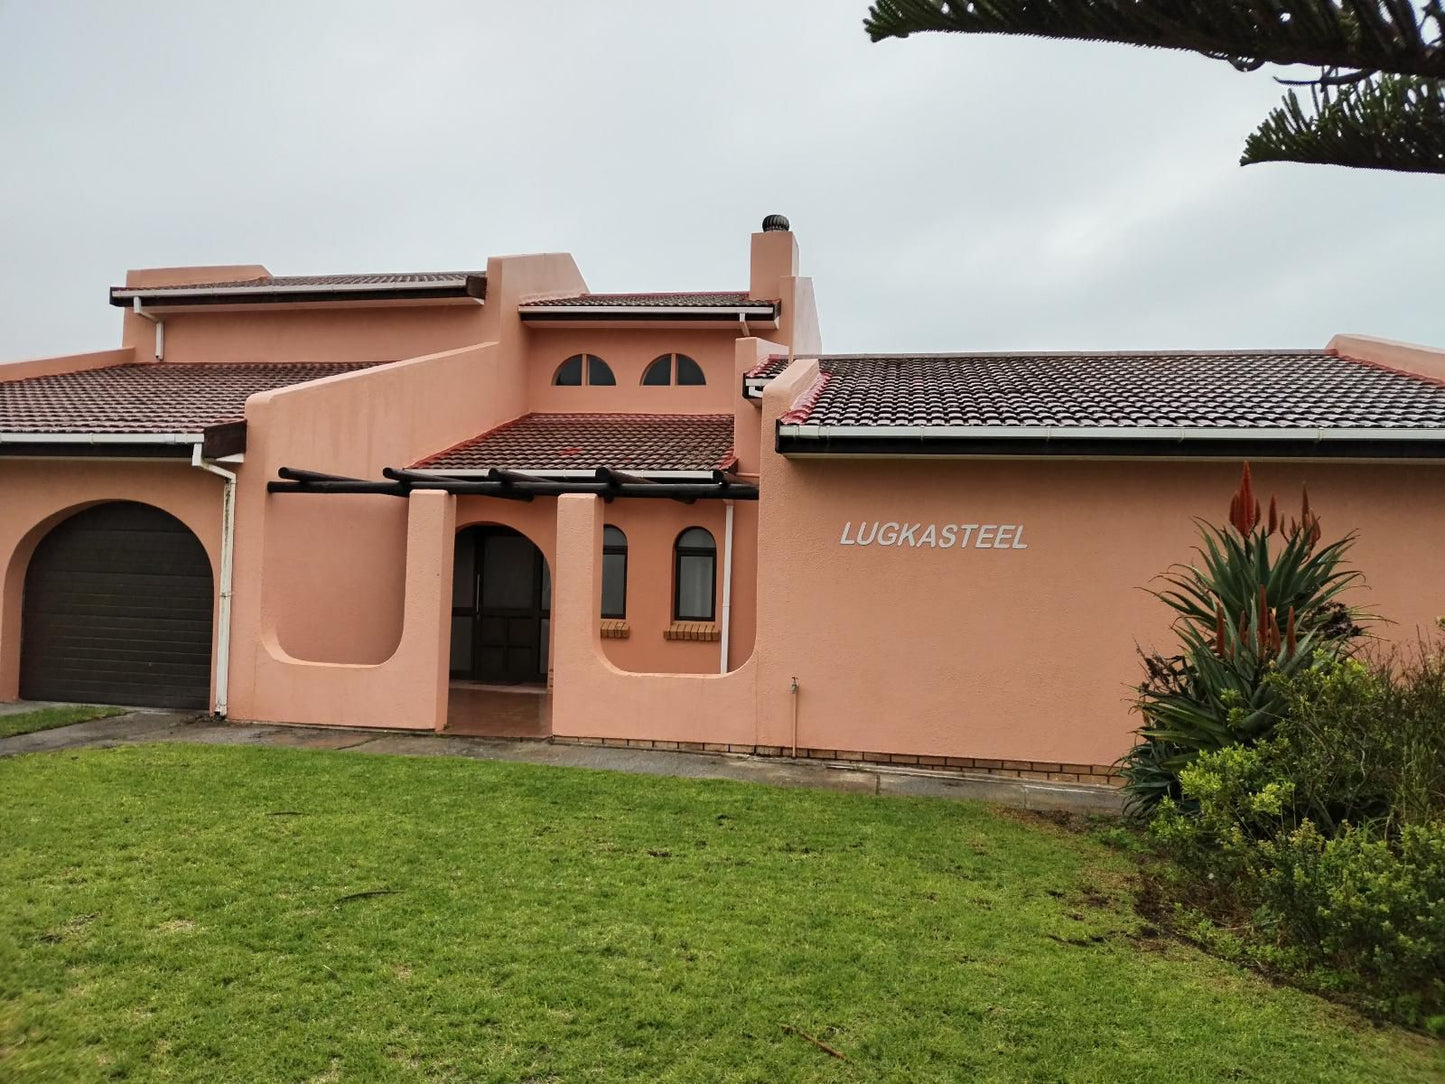 Lugkasteel Yzerfontein Western Cape South Africa House, Building, Architecture, Palm Tree, Plant, Nature, Wood